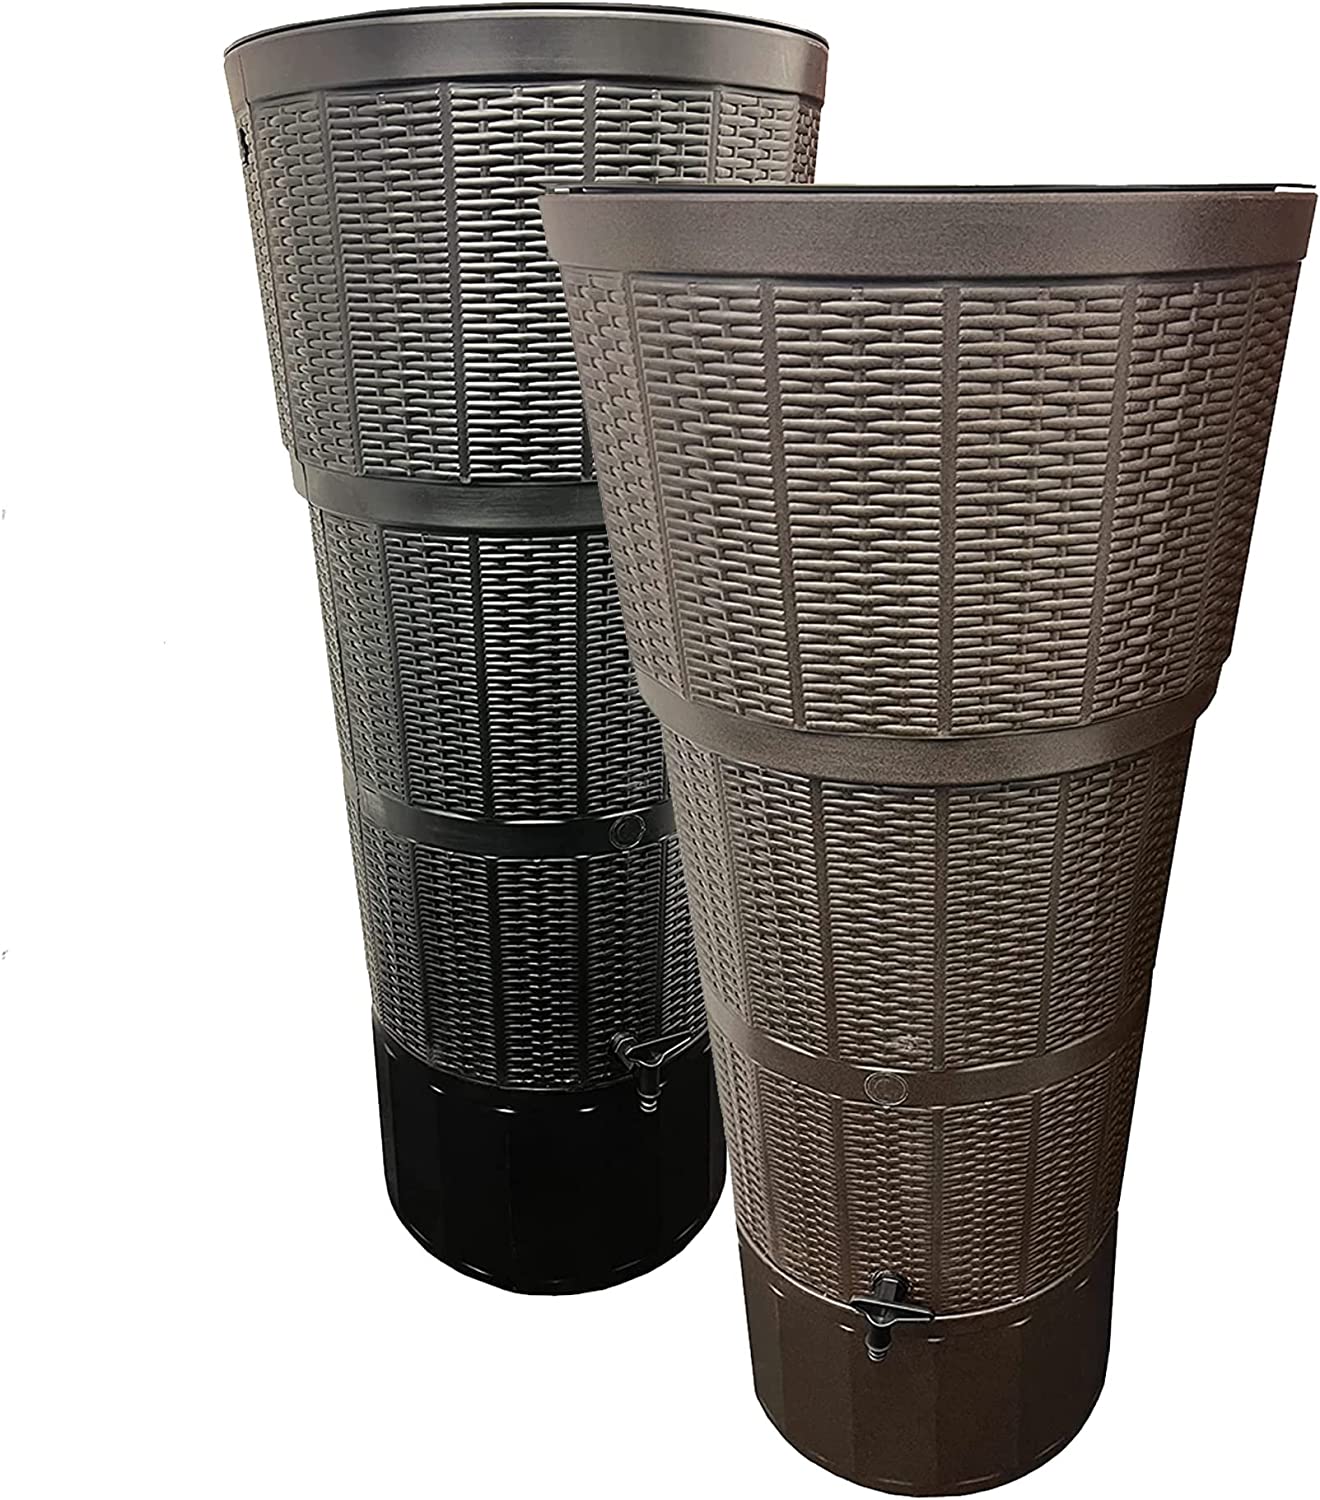 150 Litre Rattan Effect Water Butts Rain Collector Complete With Stand Tap Diverter Kit & Lid